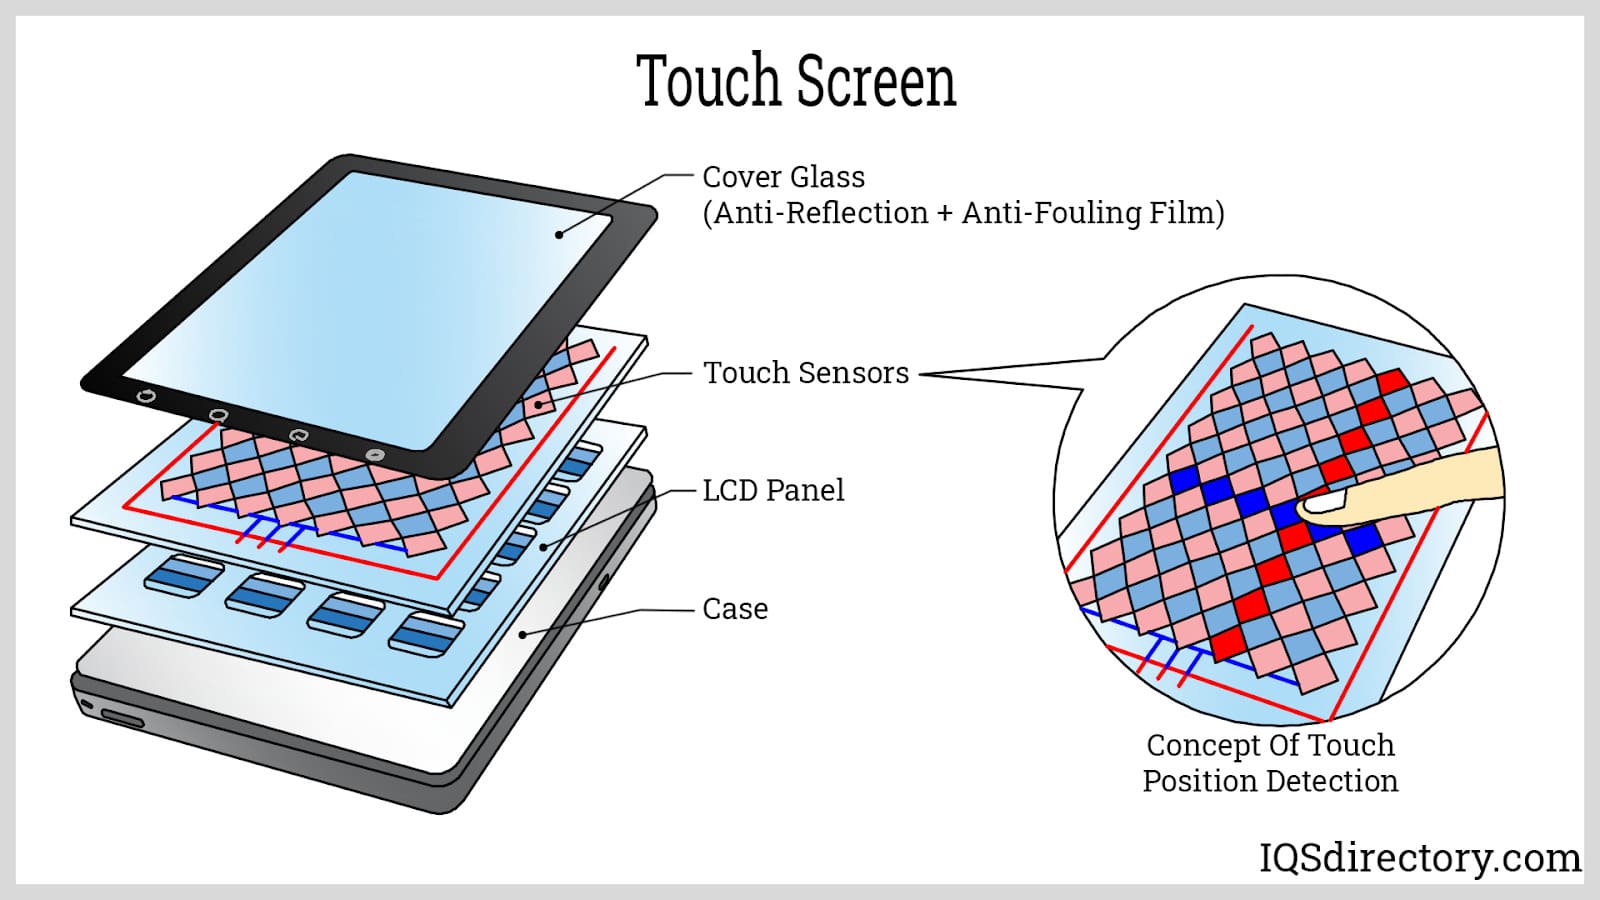 Capacitive Touch Screen: What Is It? How Does It Work? Types